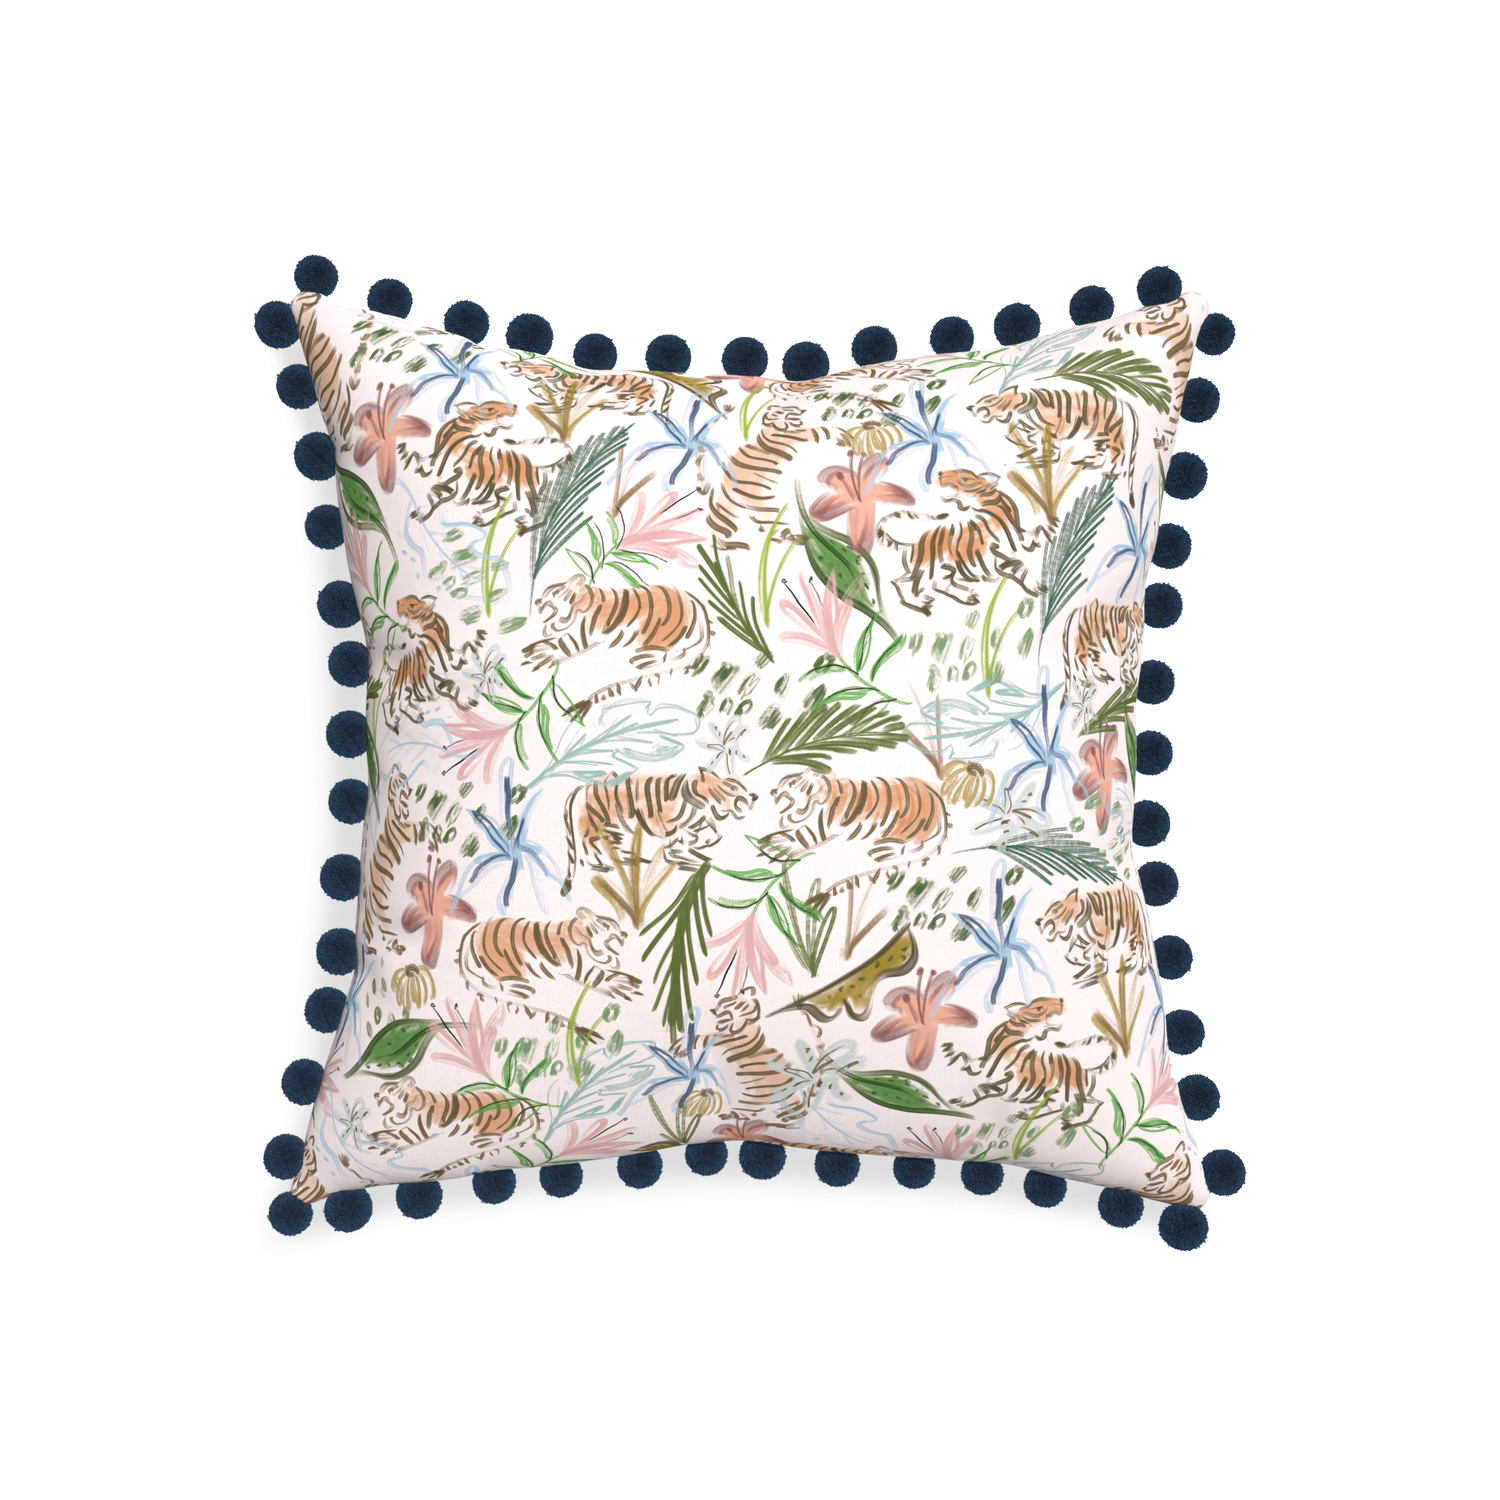 20-square frida pink custom pink chinoiserie tigerpillow with c on white background